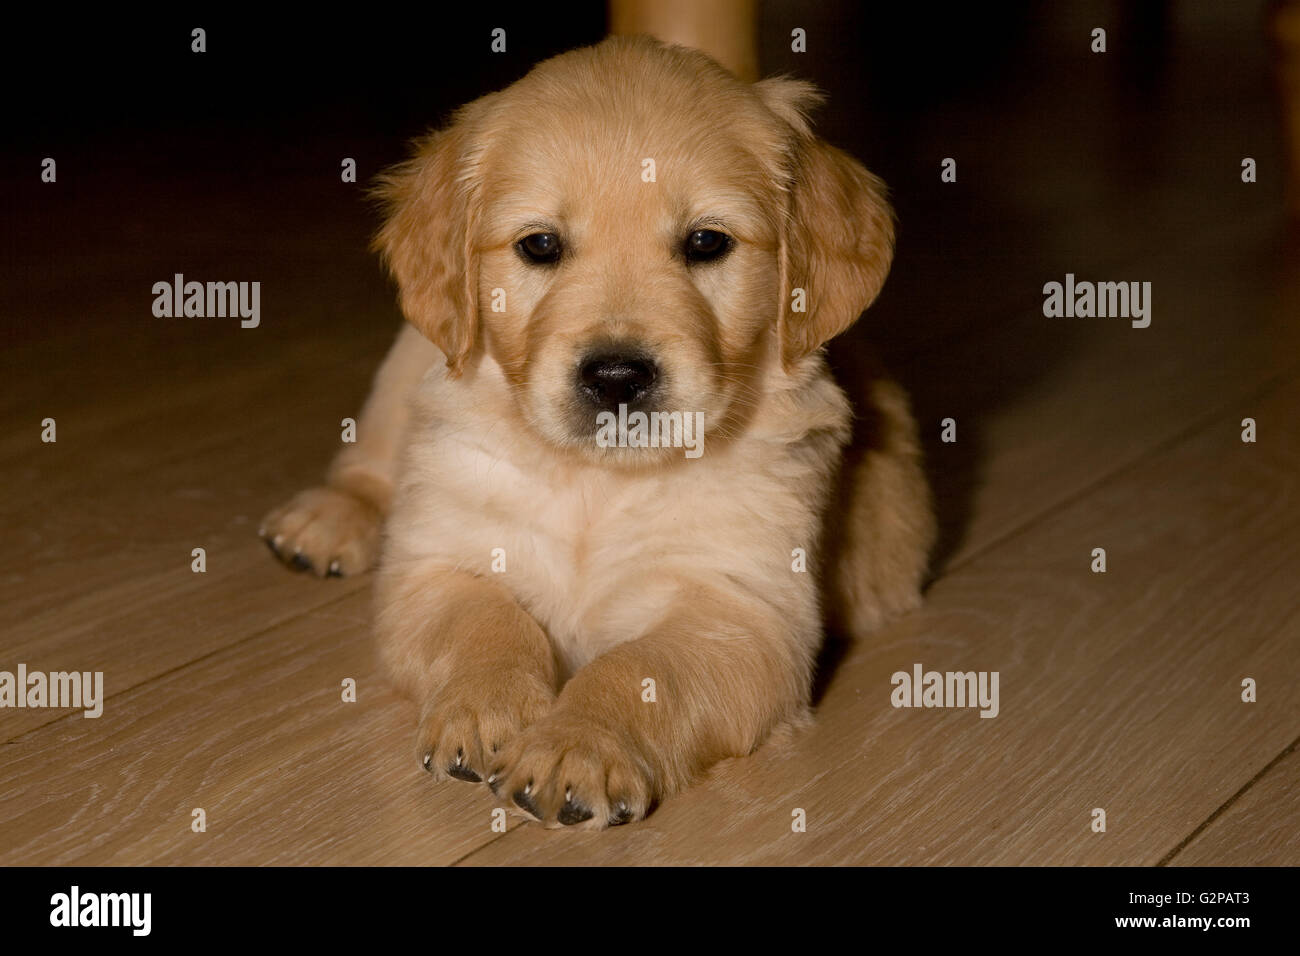 head and front paws of golden retriever puppy down on laminate floor of office study Stock Photo